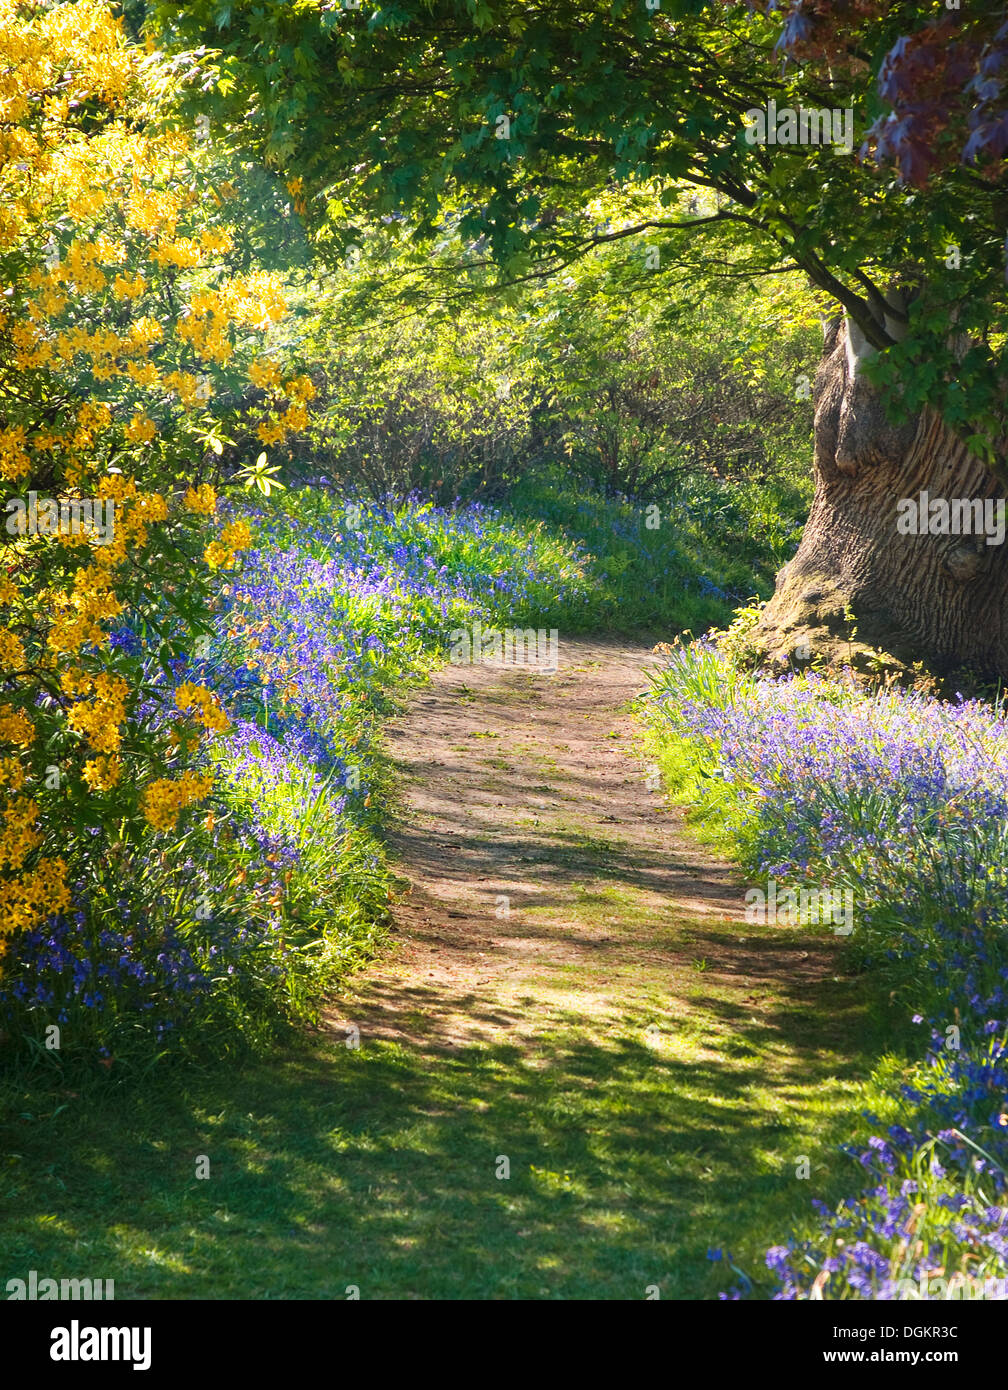 A tunnel of flowers beckoning us to explore. Stock Photo